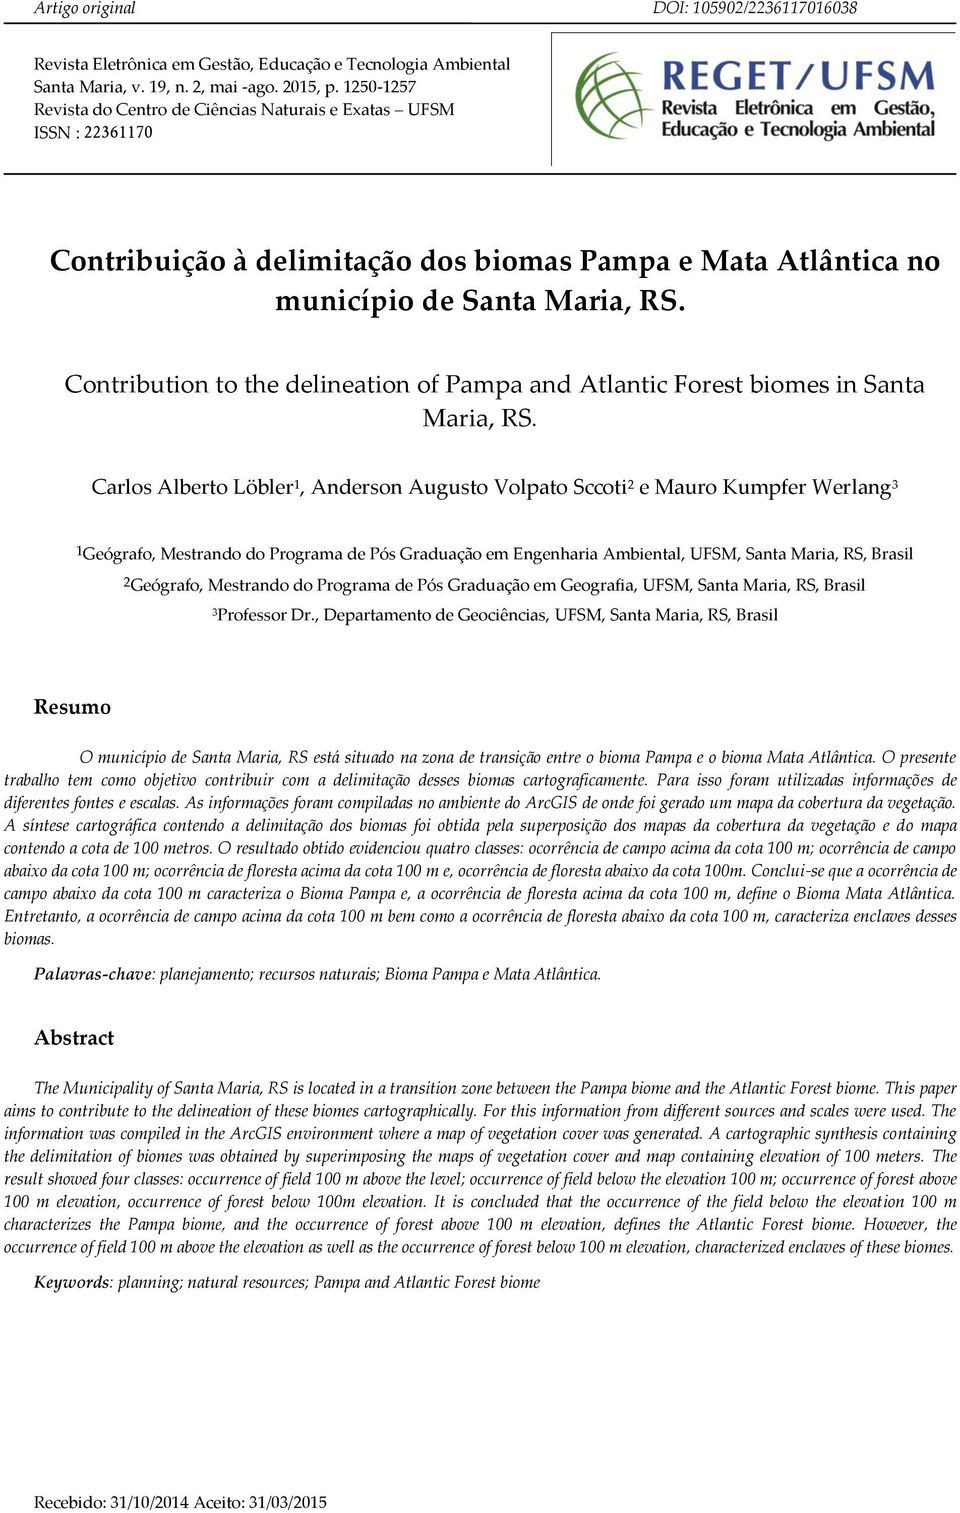 Contribution to the delineation of Pampa and Atlantic Forest biomes in Santa Maria, RS.